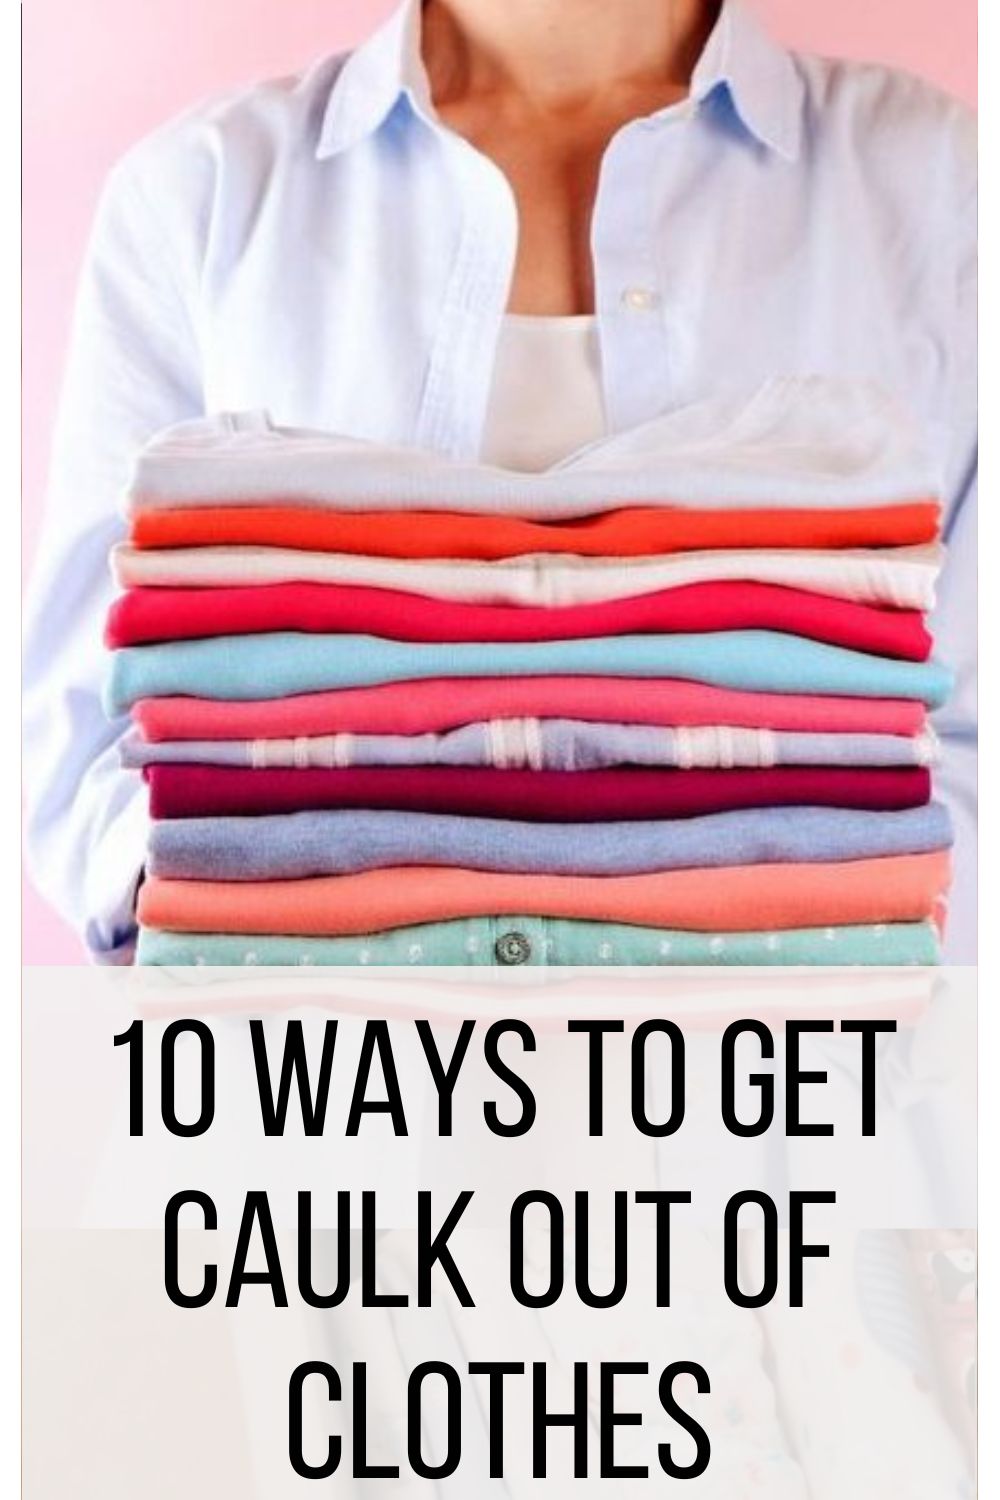 10 Ways to Get Caulk Out of Clothes